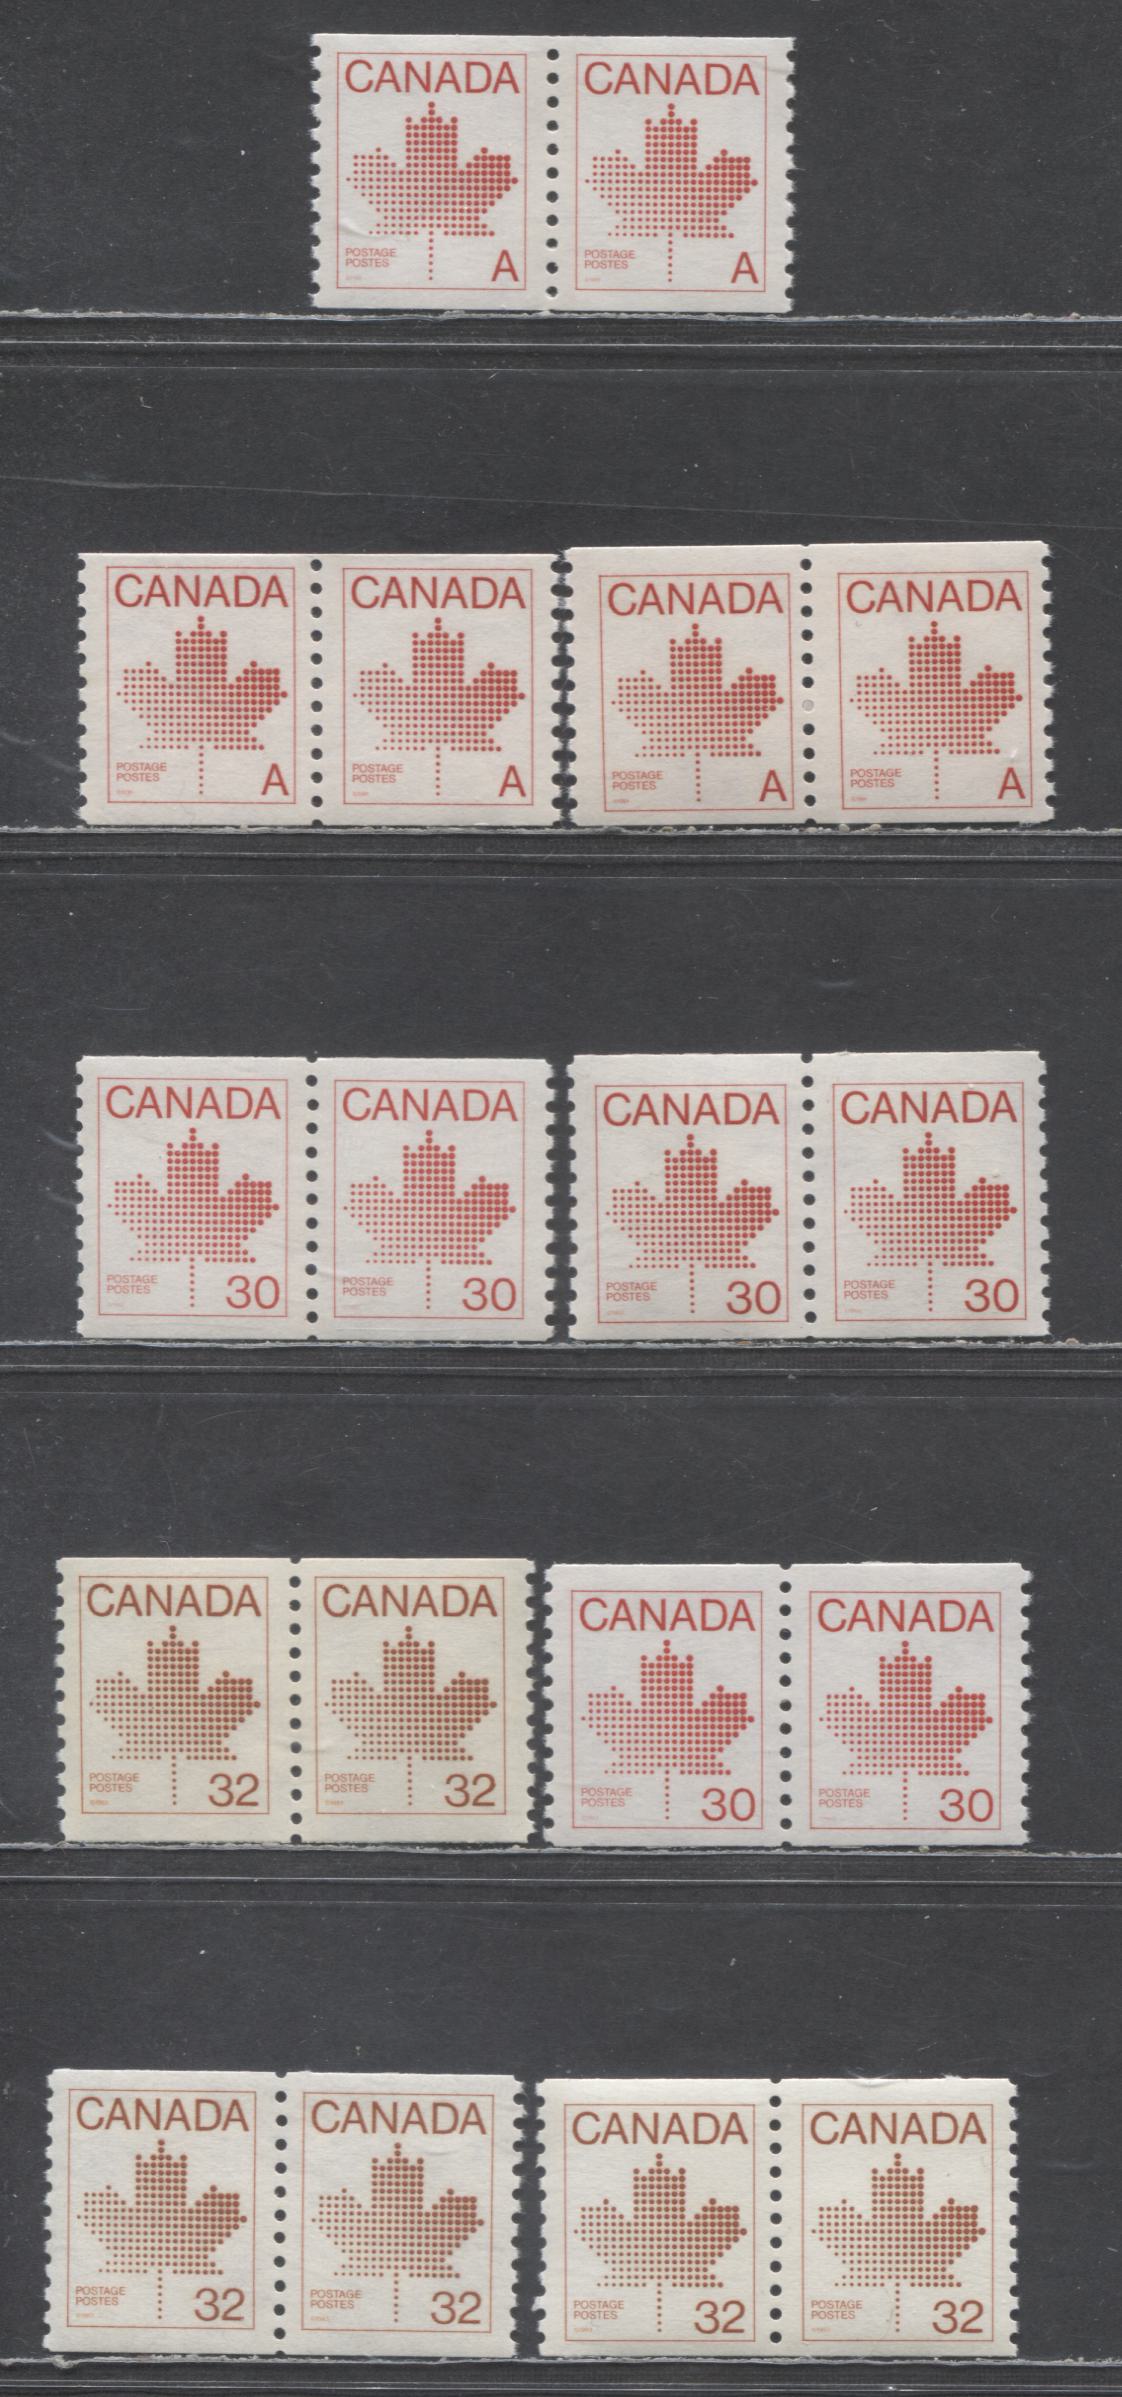 Lot 318 Canada #908,ii,950, 951,iii A(30c), 30c & 32c Red Maple Leaf, 1981-1983 Non-Denominated 'A' Definitive, 8 VFNH Pairs On Various Abitibi & Clark Papers